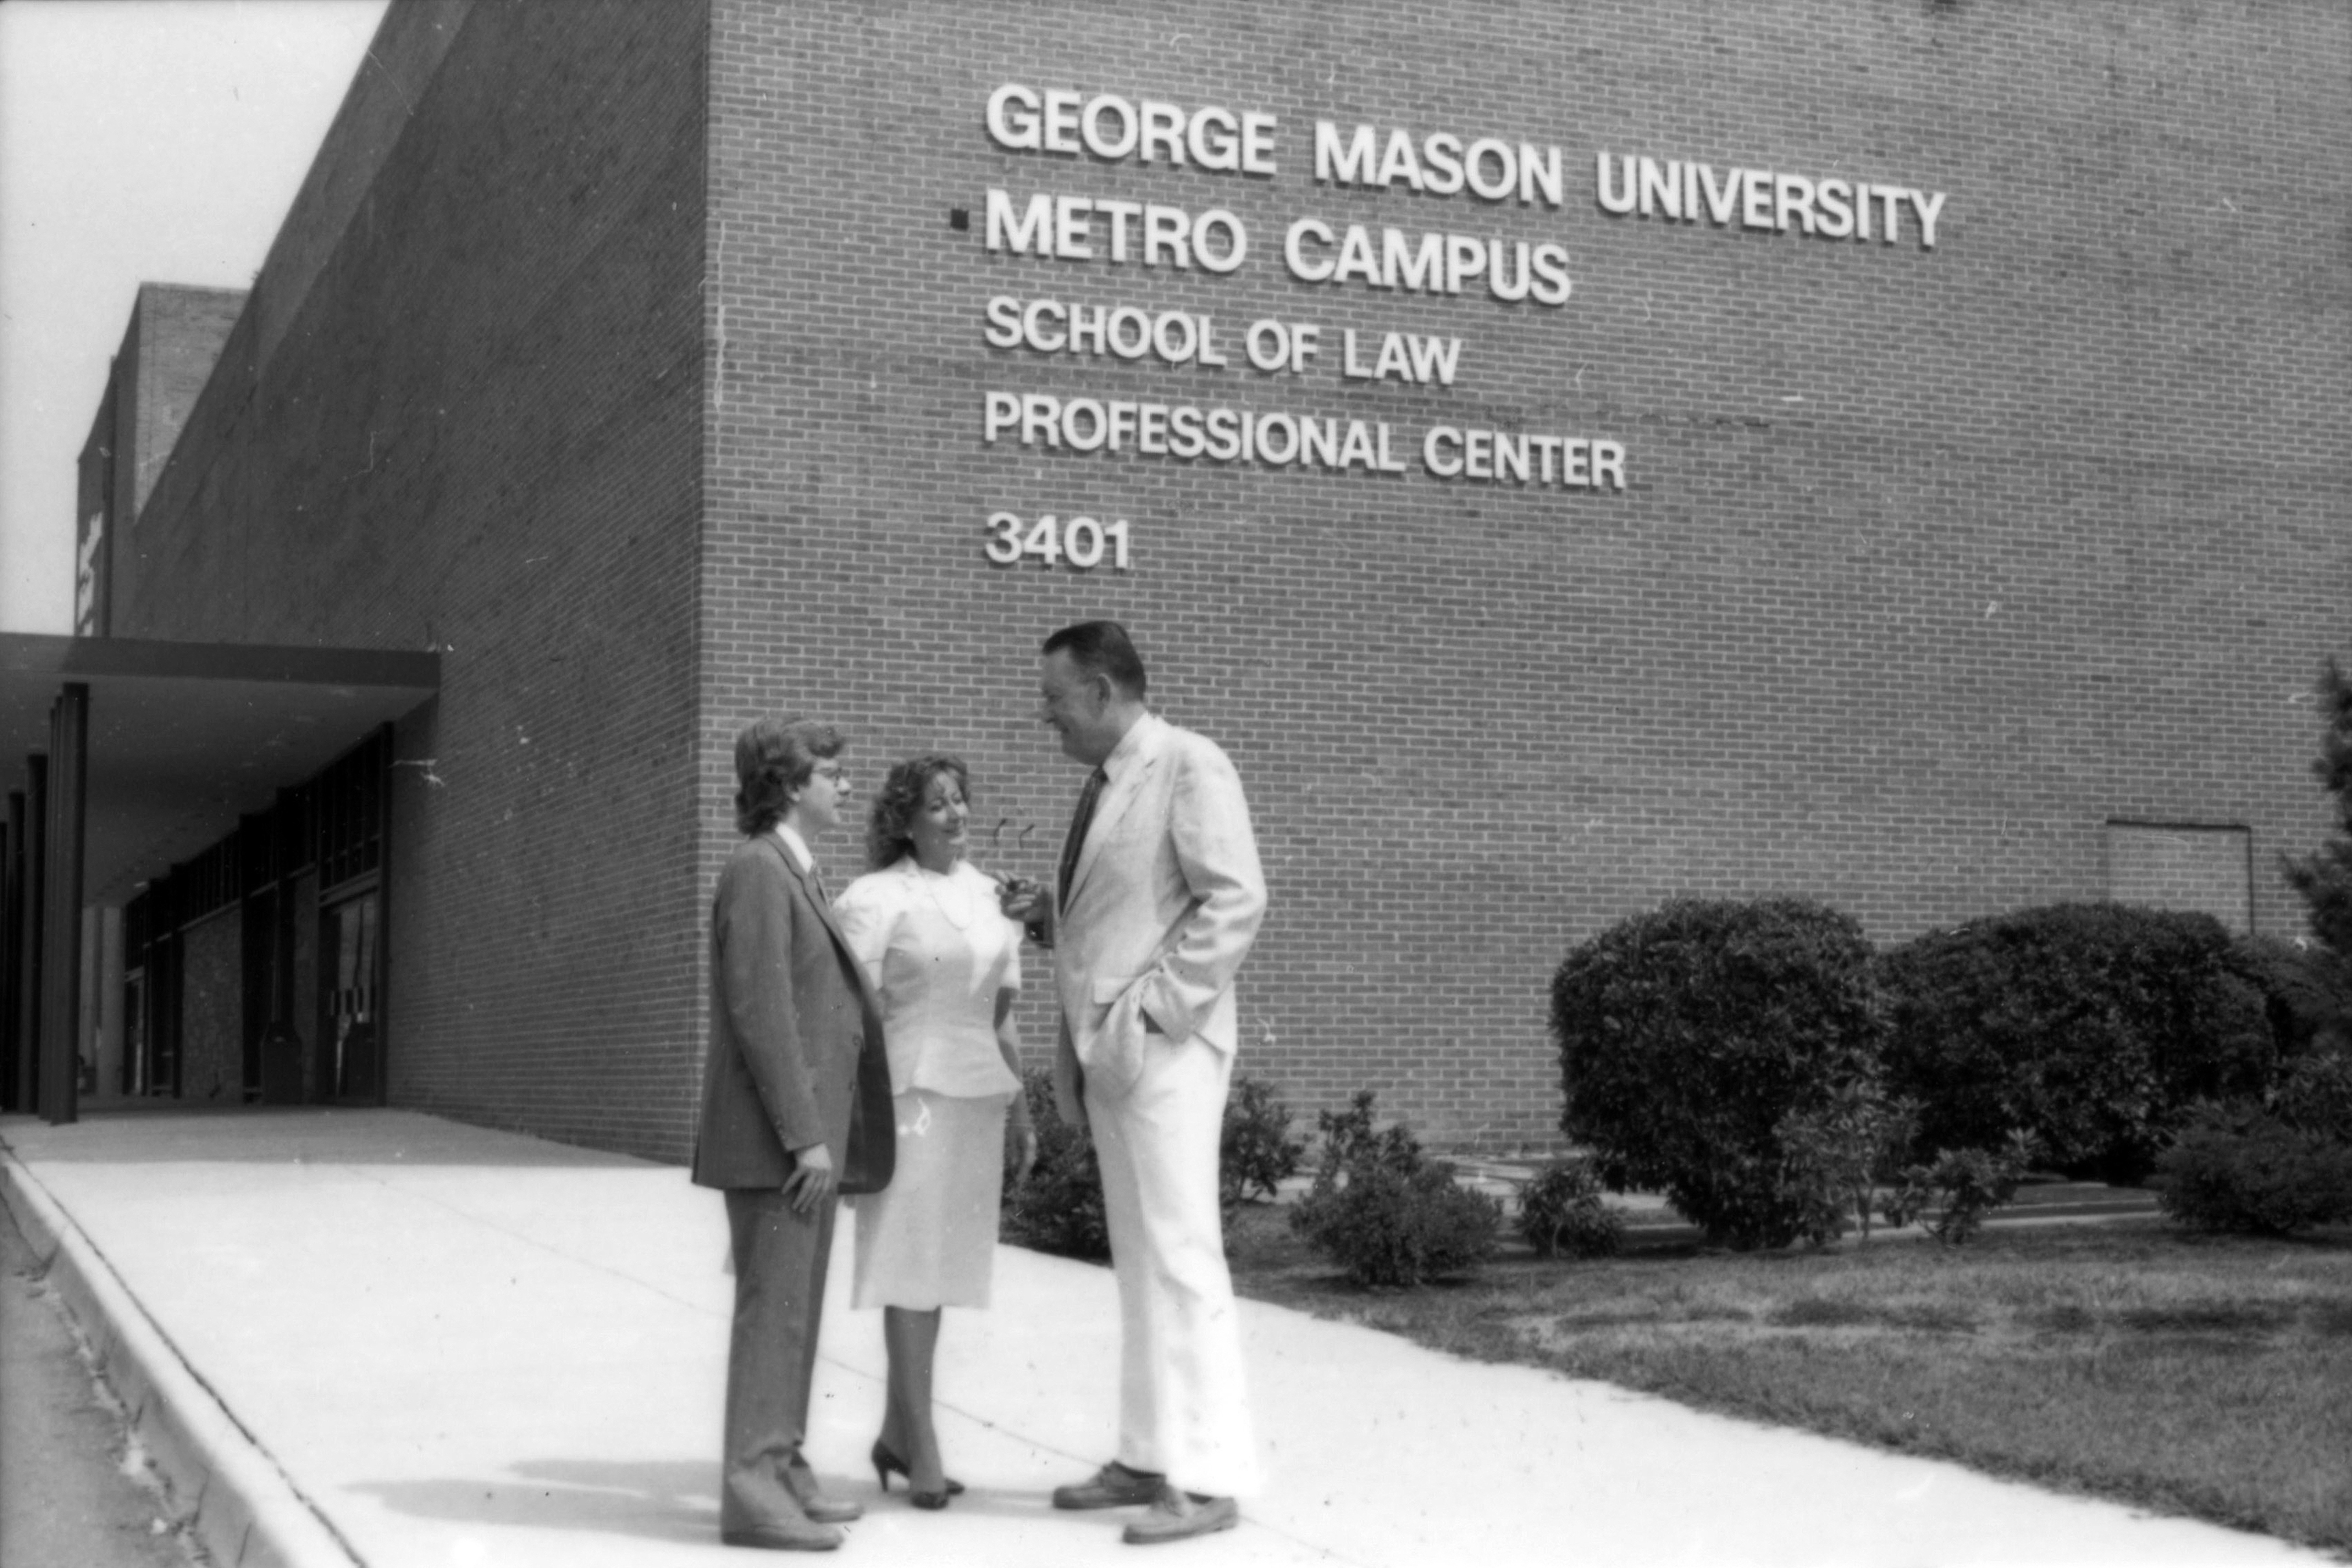 John T. "Til" Hazel and students in front of the George Mason University School of Law, July 31, 1987